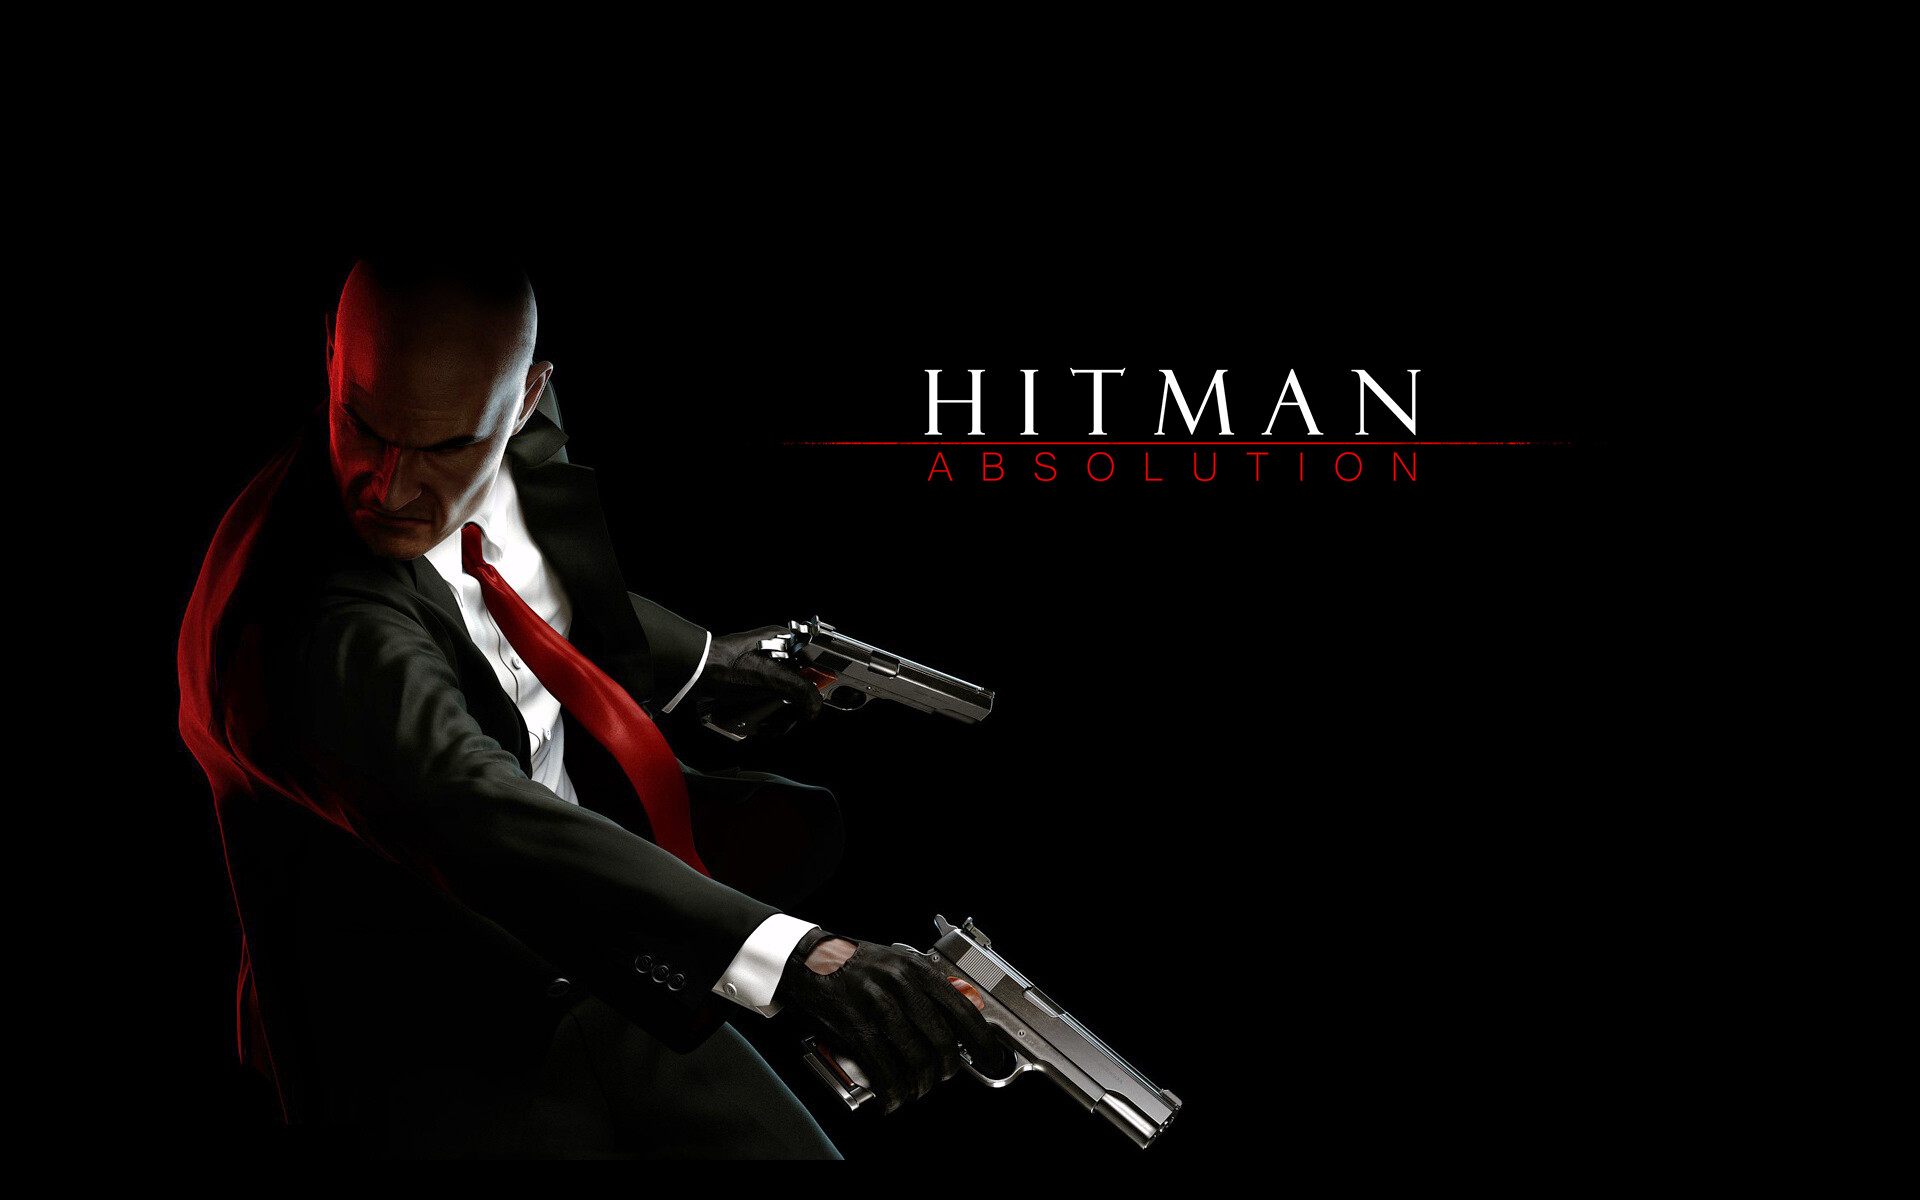 Free download Hitman Absolution exclusive HD wallpapers, Captivating artwork, Intense action, Thrilling adventure, 1920x1200 HD Desktop